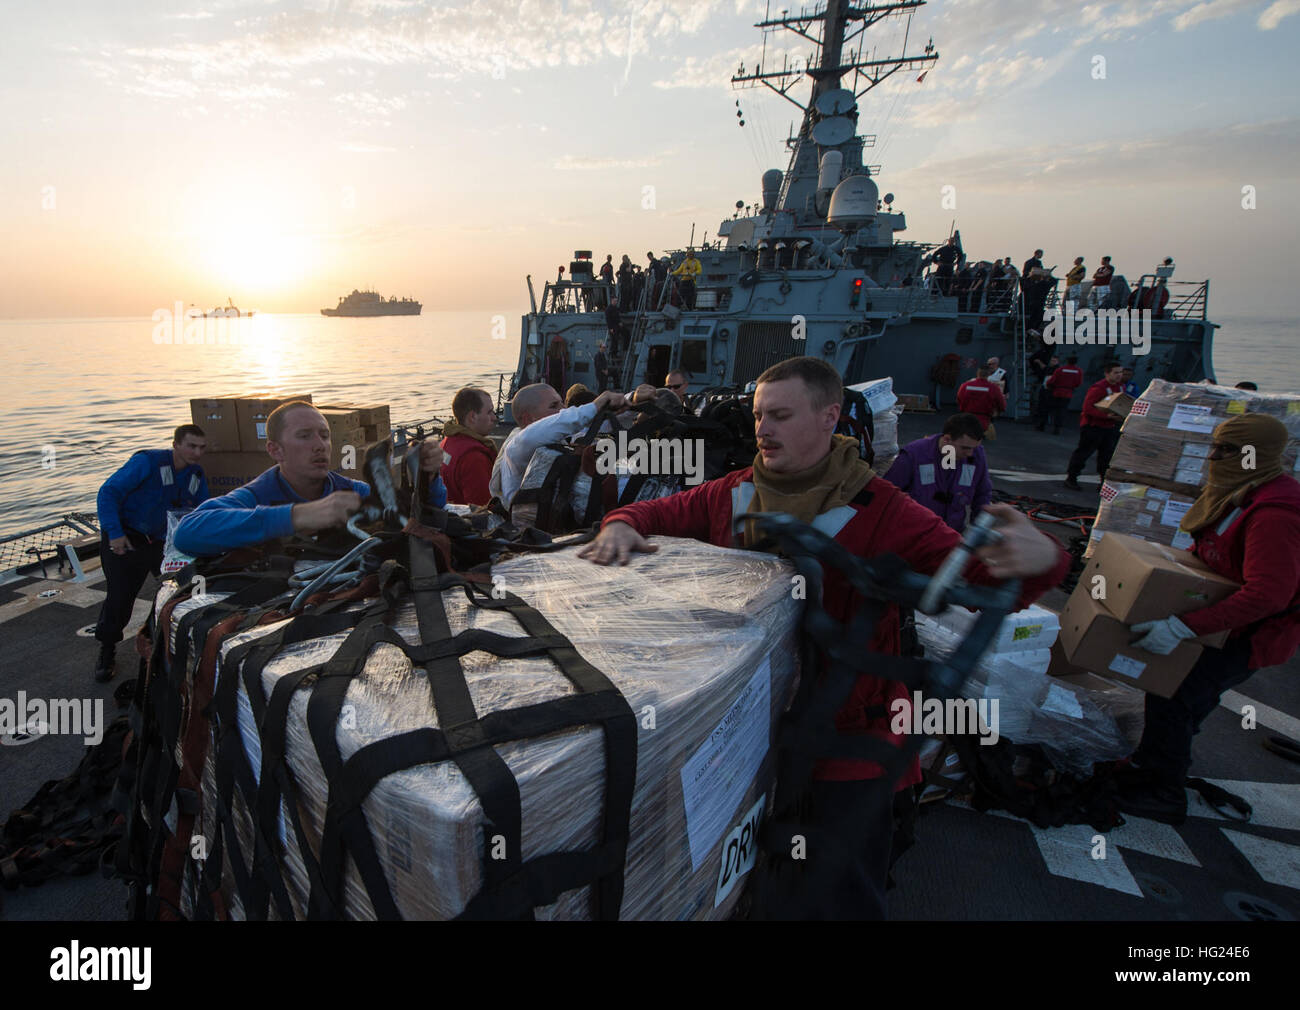 ARABIAN GULF (Feb. 13, 2015) Sailors aboard the guided-missile destroyer USS Mitscher (DDG 57) remove cargo nets from supplies after a vertical replenishment with the Military Sealift Command dry cargo and ammunition ship USNS Charles Drew (T-AKE 10) as an SA-330J Puma helicopter flies supplies to the USS Milius (DDG 69), background, left. Mitscher is deployed in the U.S. 5th Fleet area of operations supporting Operation Inherent Resolve, strike operations in Iraq and Syria as directed, maritime security operations and theater security cooperation efforts in the region. (U.S. Navy photo by Mas Stock Photo